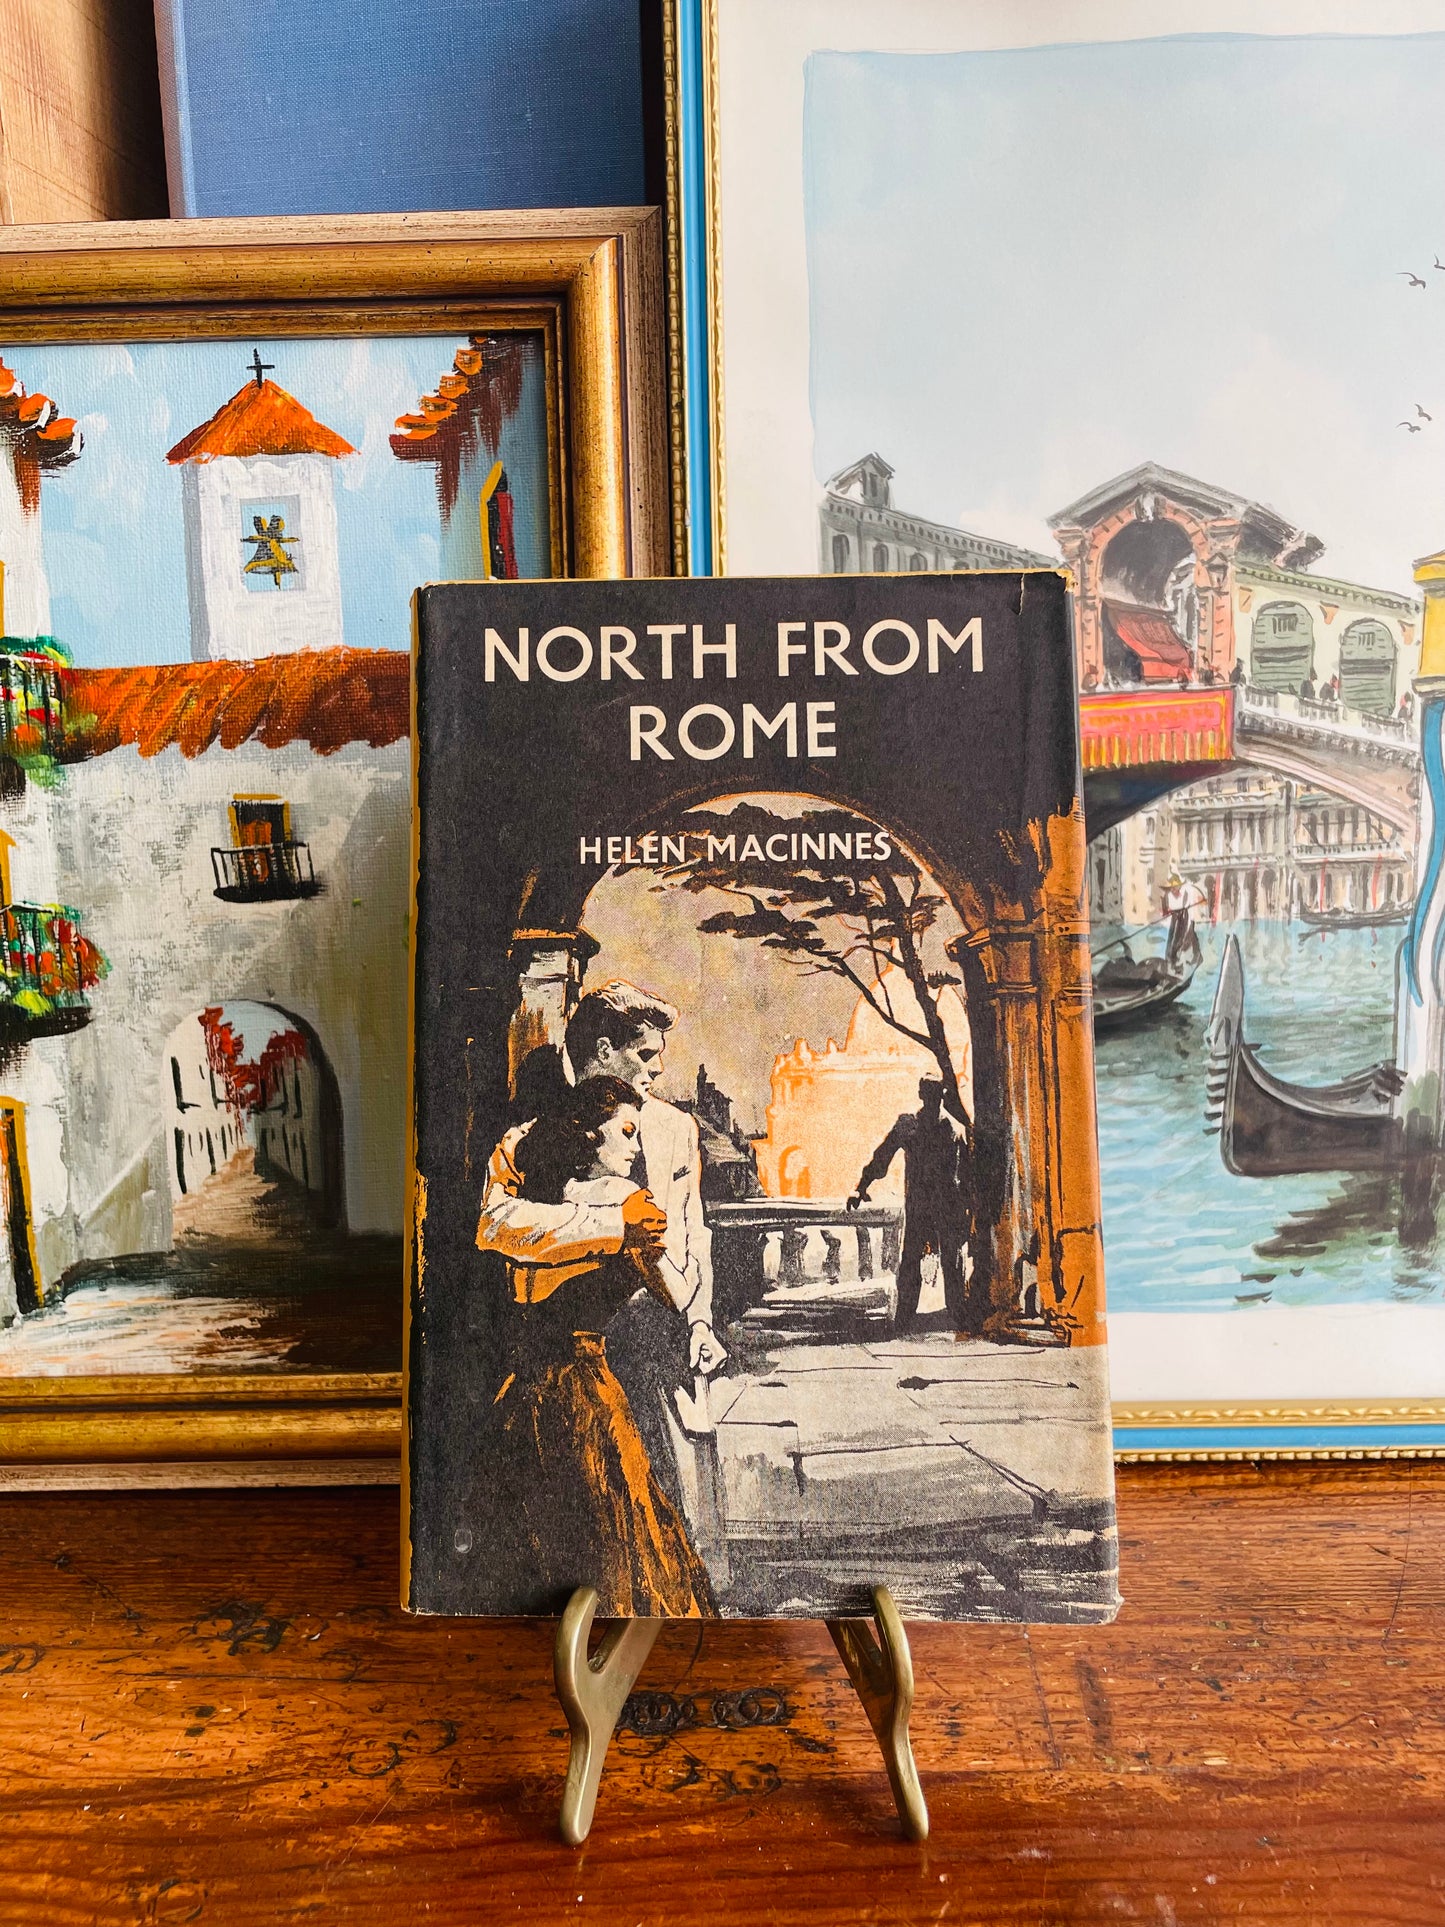 North From Rome by Helen MacInnes - Yellow Clothbound Hardcover Book (1958) - Secret Agent Cold War Thriller